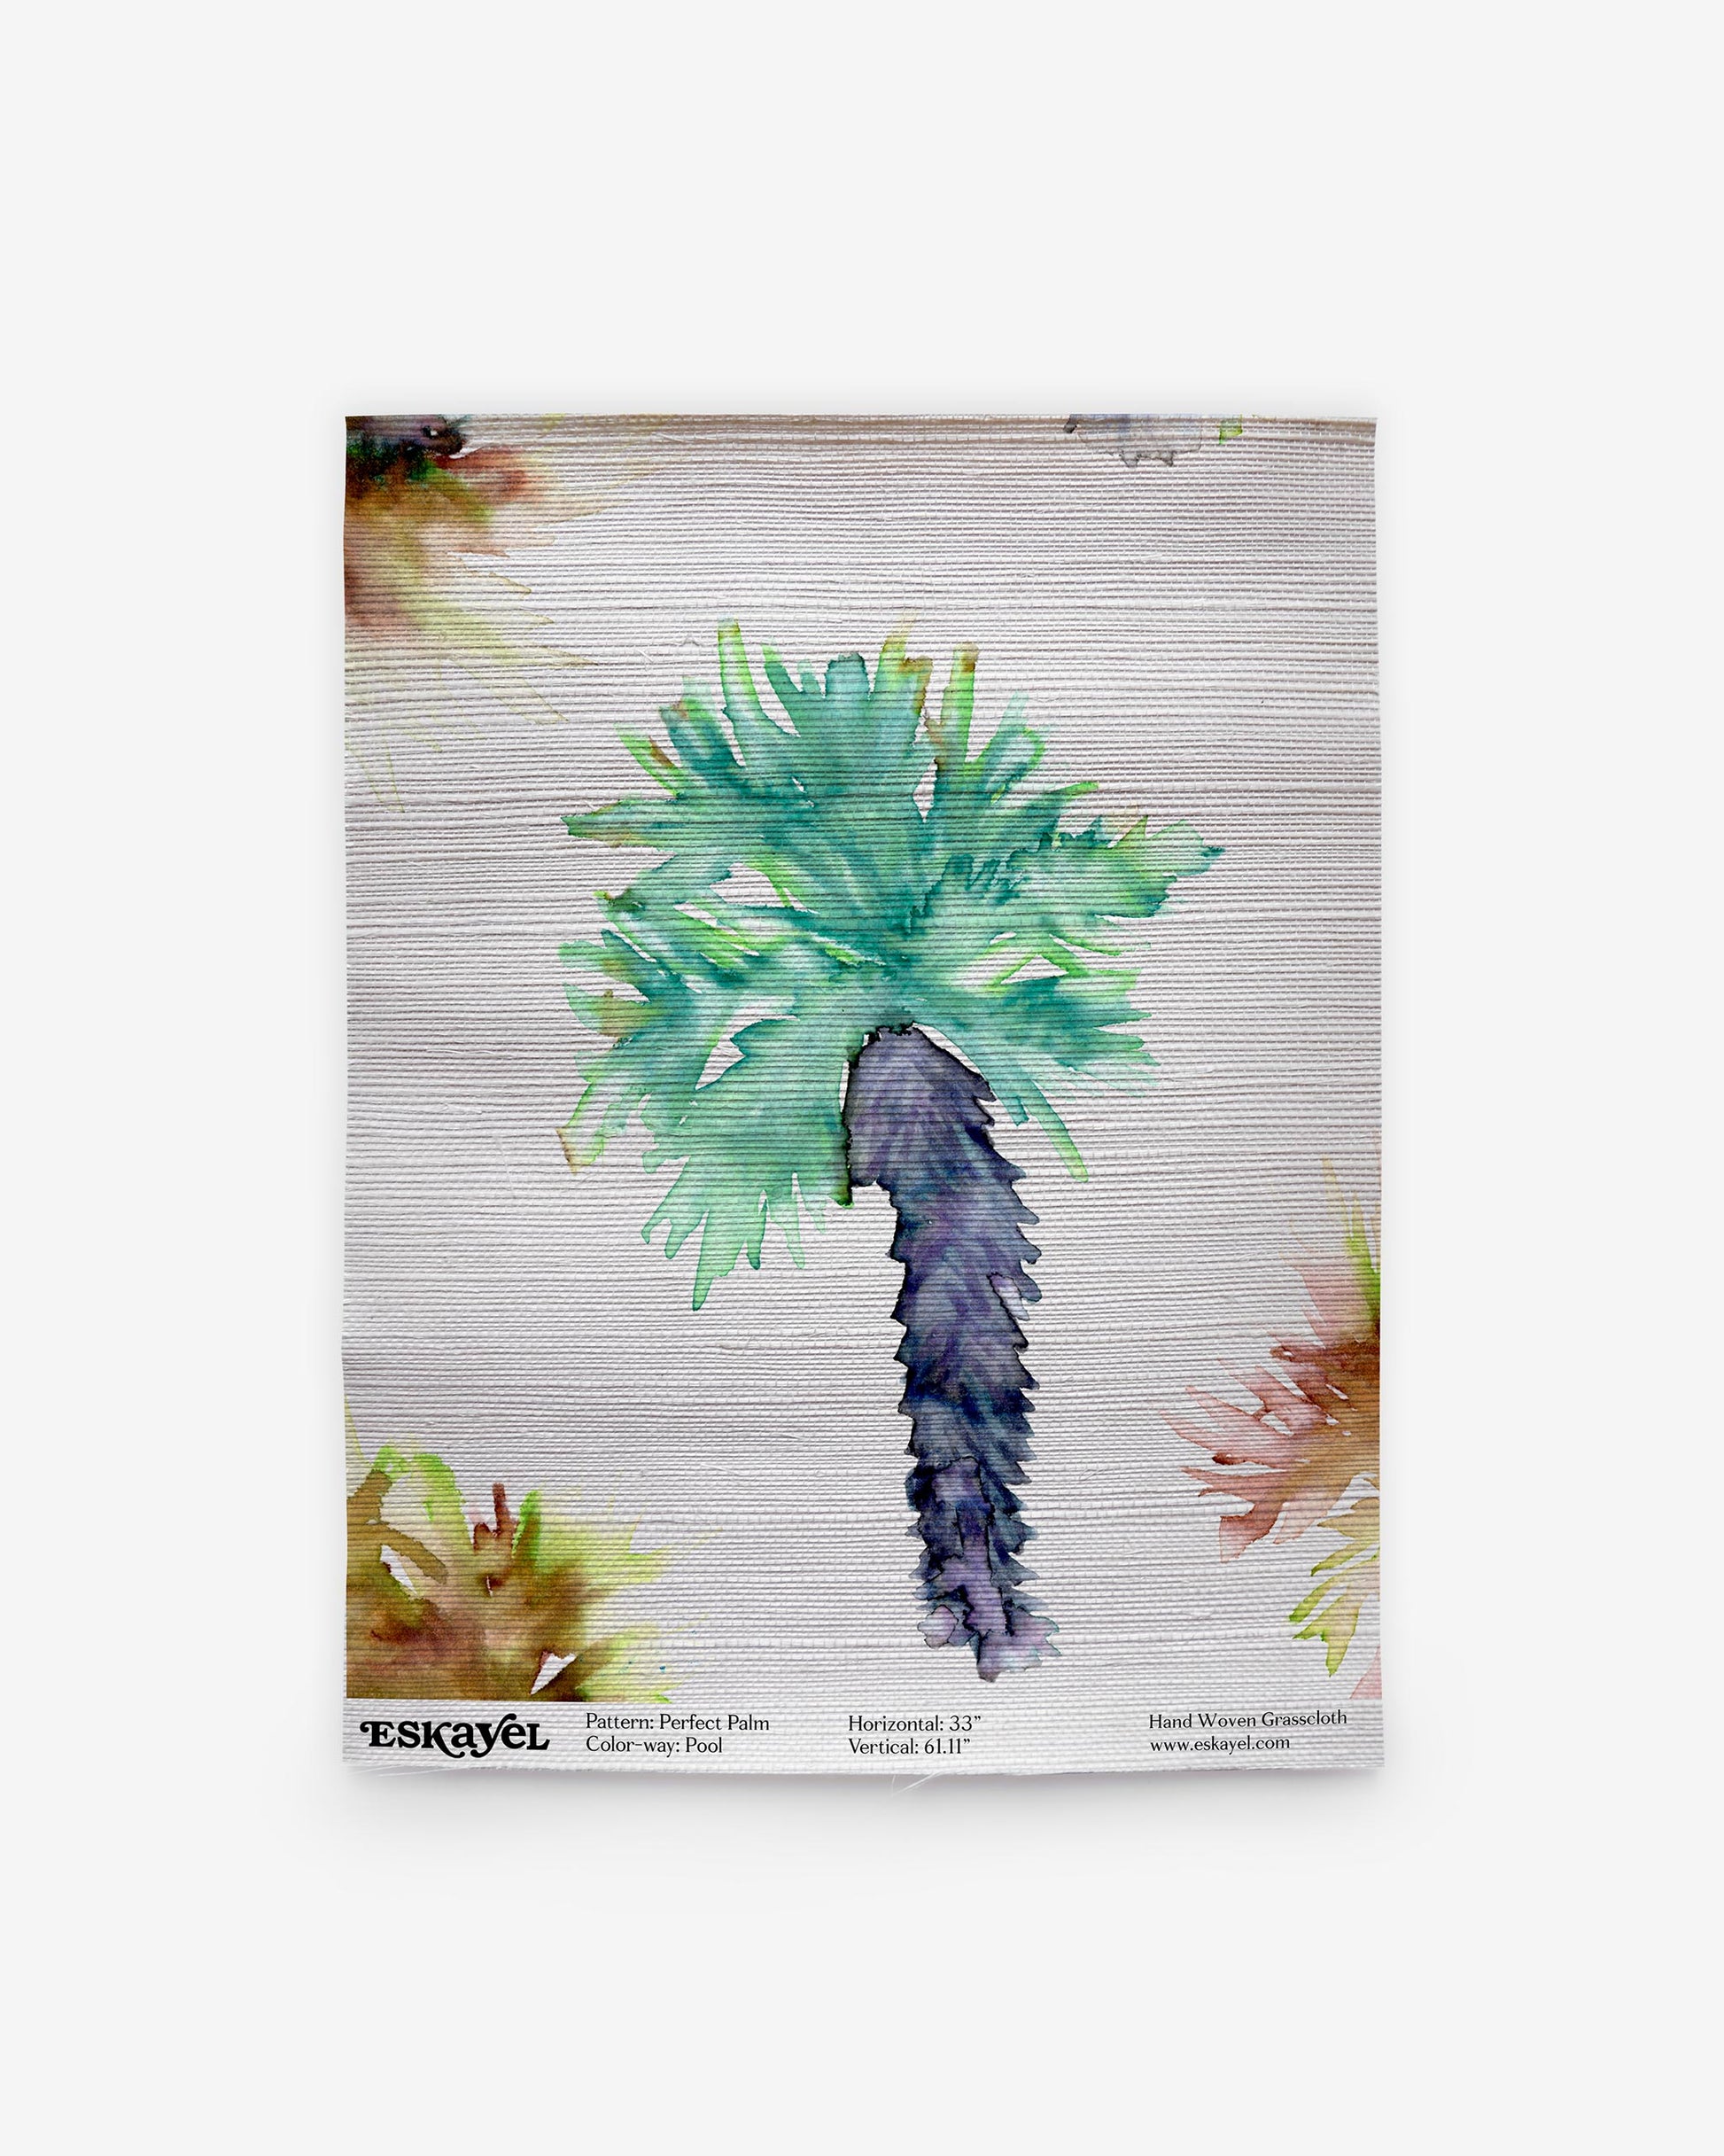 A Perfect Palm Grasscloth Pool painting of palm trees in a watercolor style